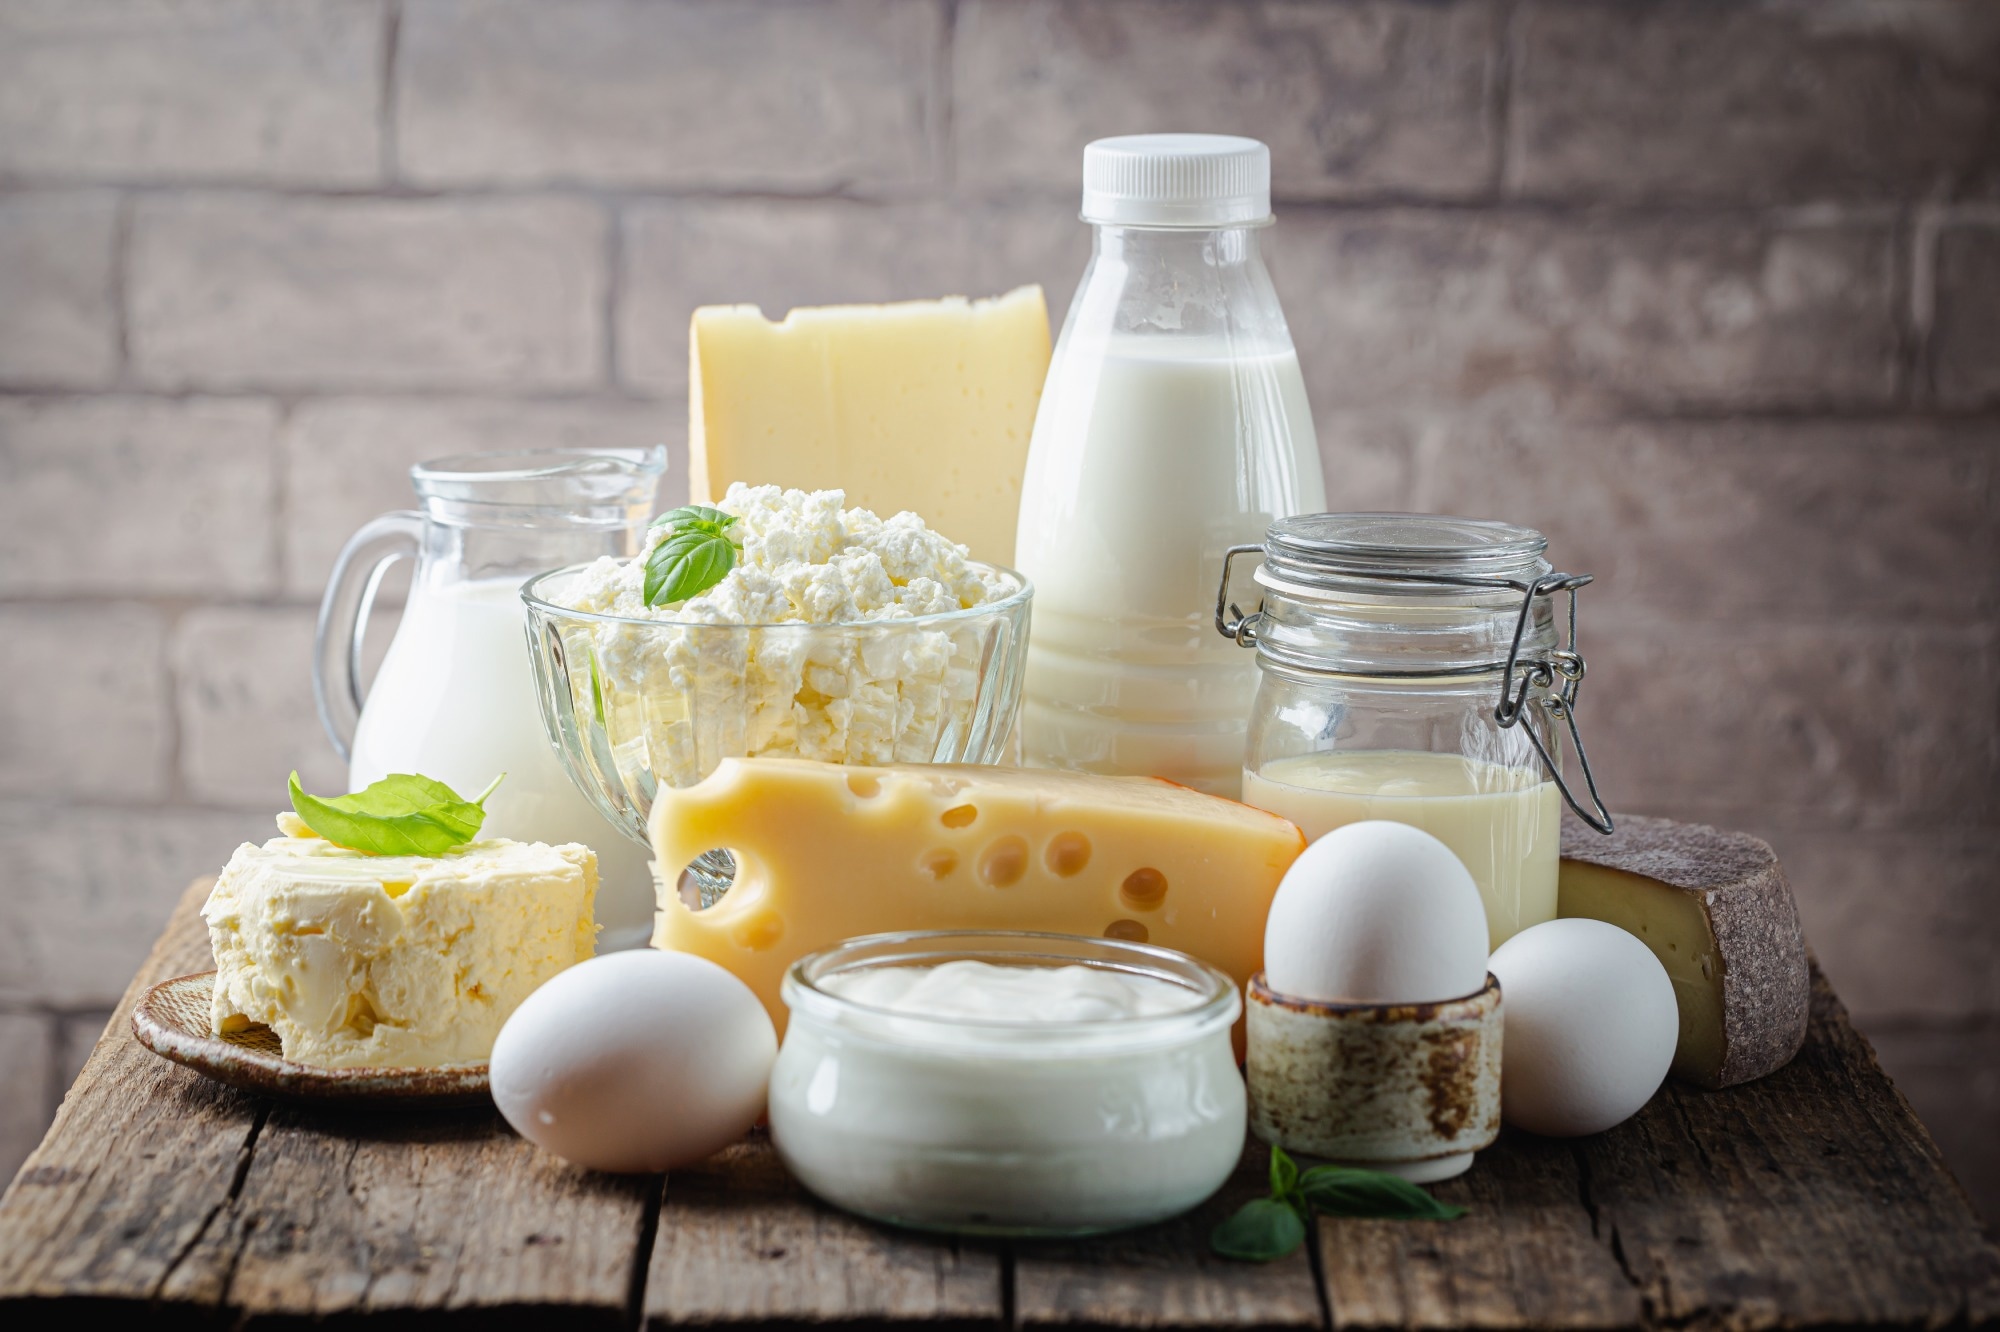 replacing dinner calcium with breakfast intake could reduce heart disease risk, study finds